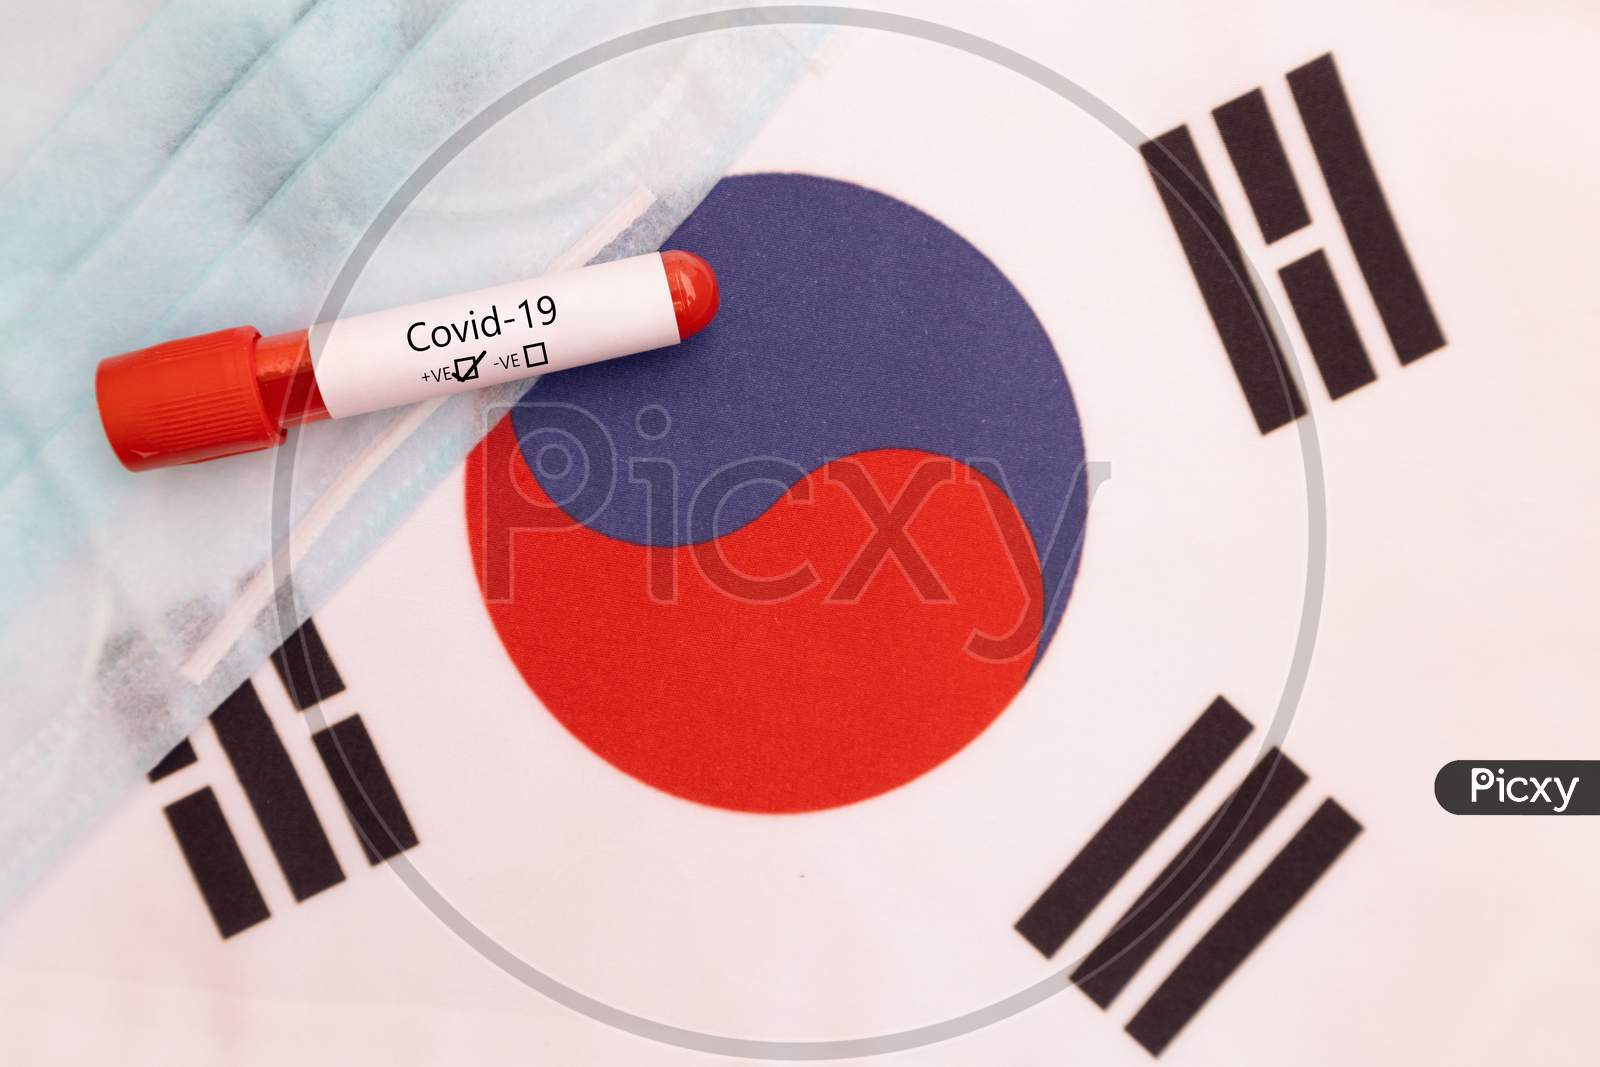 Concept Of Novel Coronavirus Spread From China To South Korea - 2019-Ncov Or Covid-19 Disease Positive Test On South Korean Flag Showing With Blood Sample.